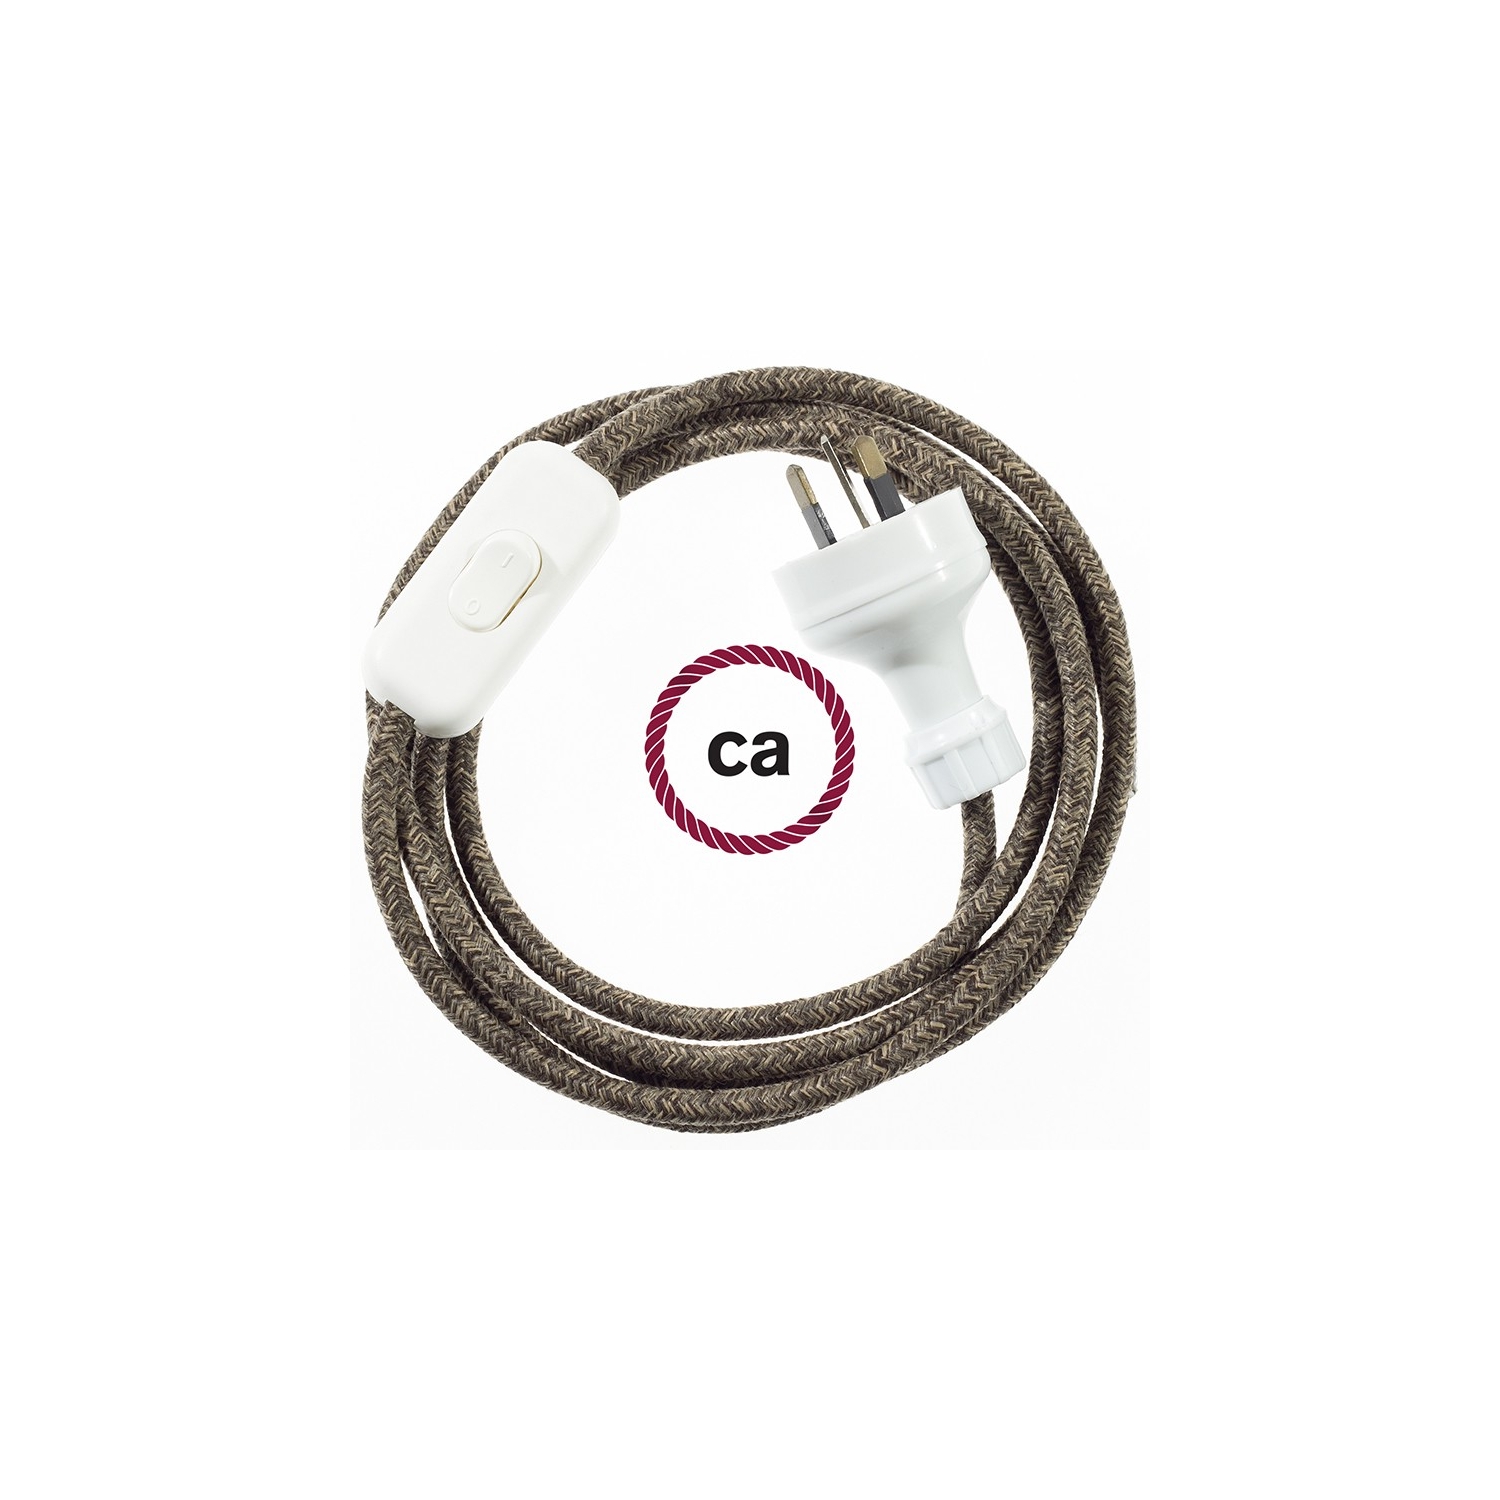 Wiring Brown Natural Linen textile cable RN04 - 1.80 mt